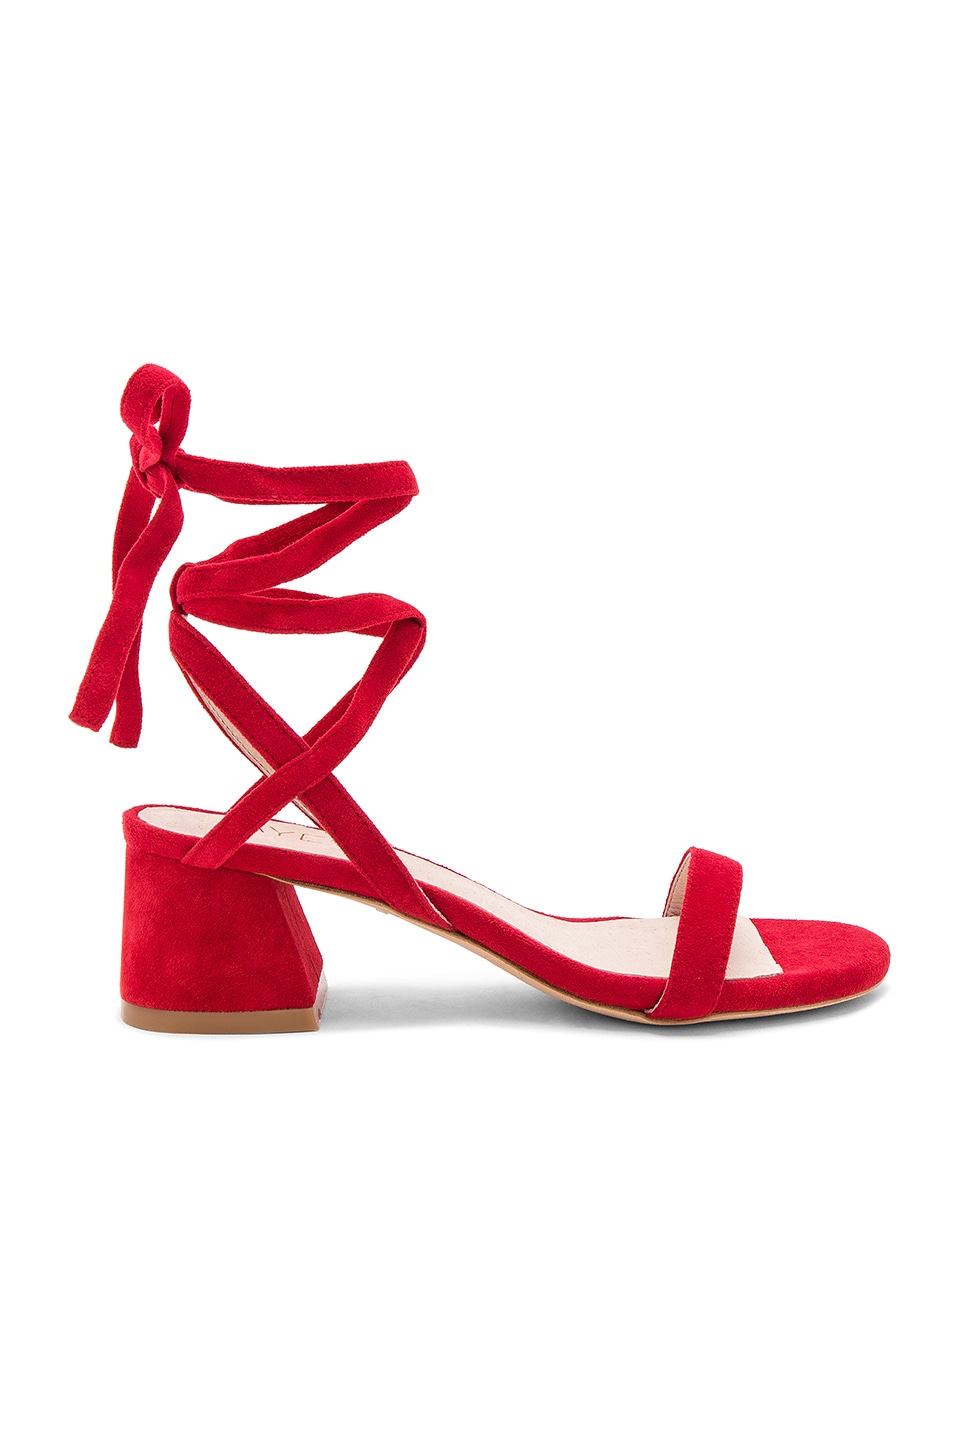 RAYE Candy Sandal in Rouge | REVOLVE